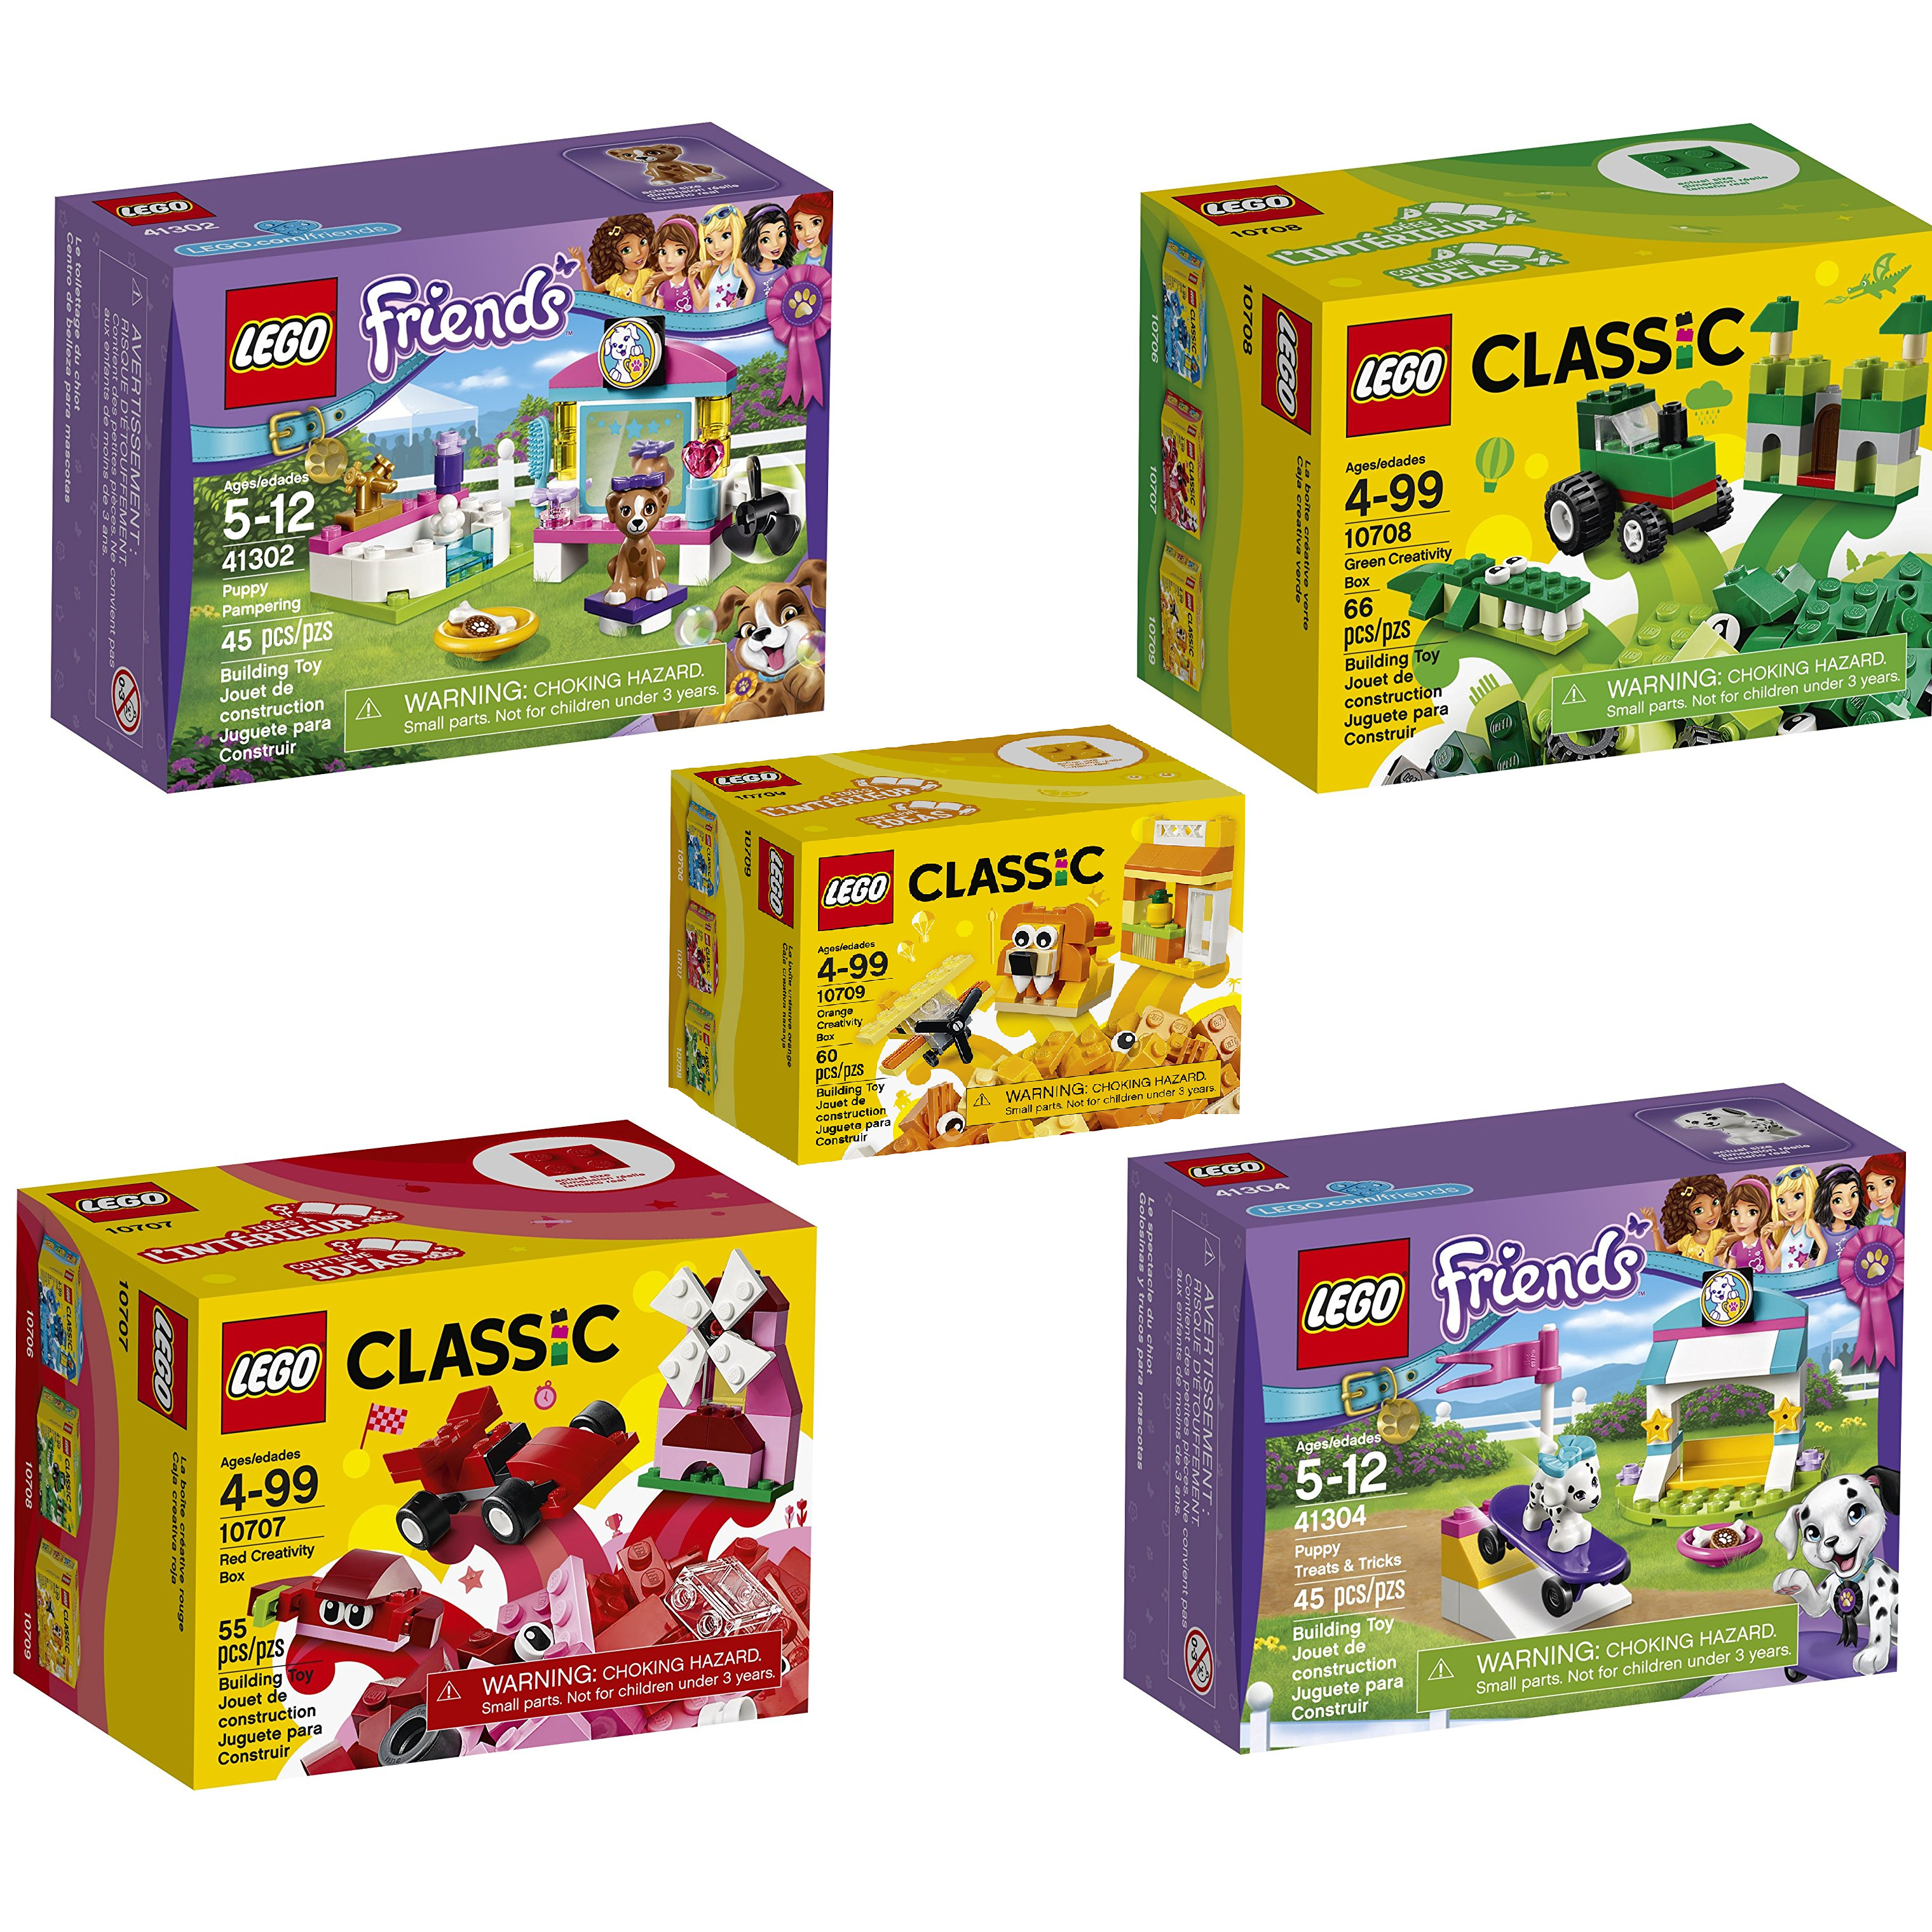 LEGO Sets All Under $5.00 on Amazon! (Great Easter Basket Fillers!)